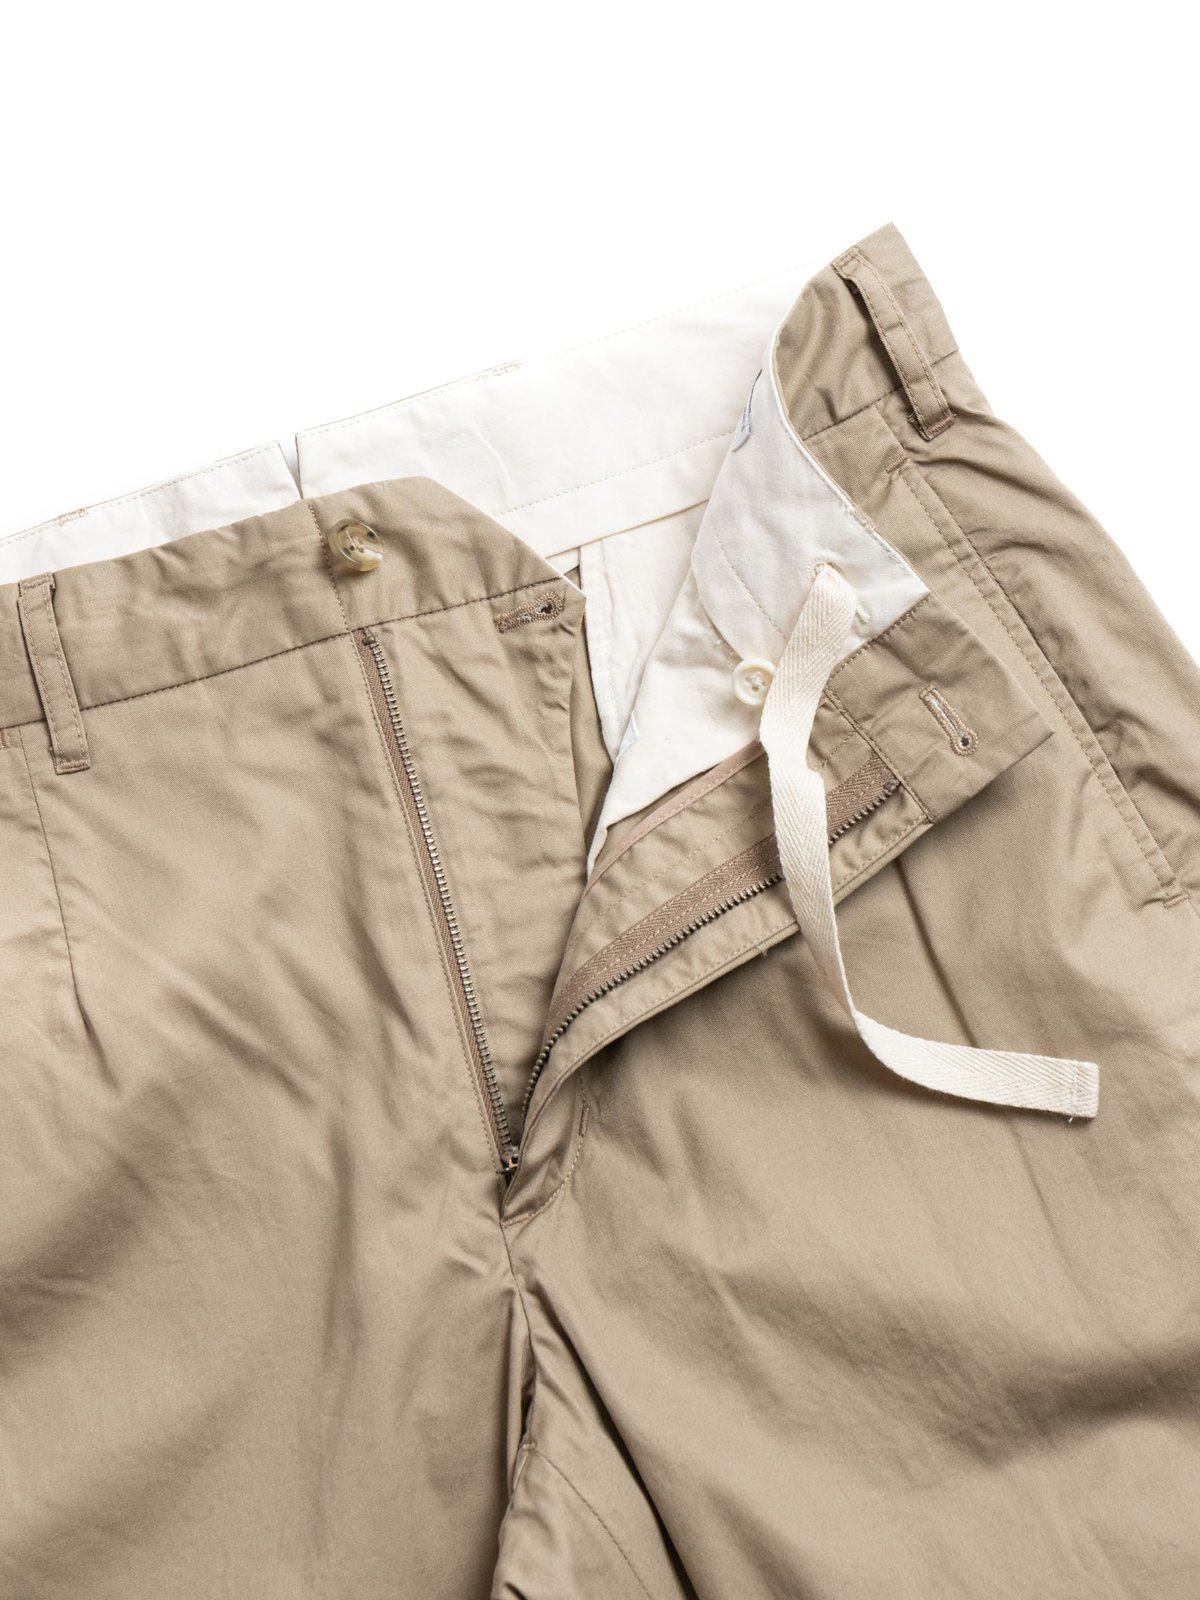 ANDOVER PANT KHAKI HIGH COUNT TWILL - Image 3